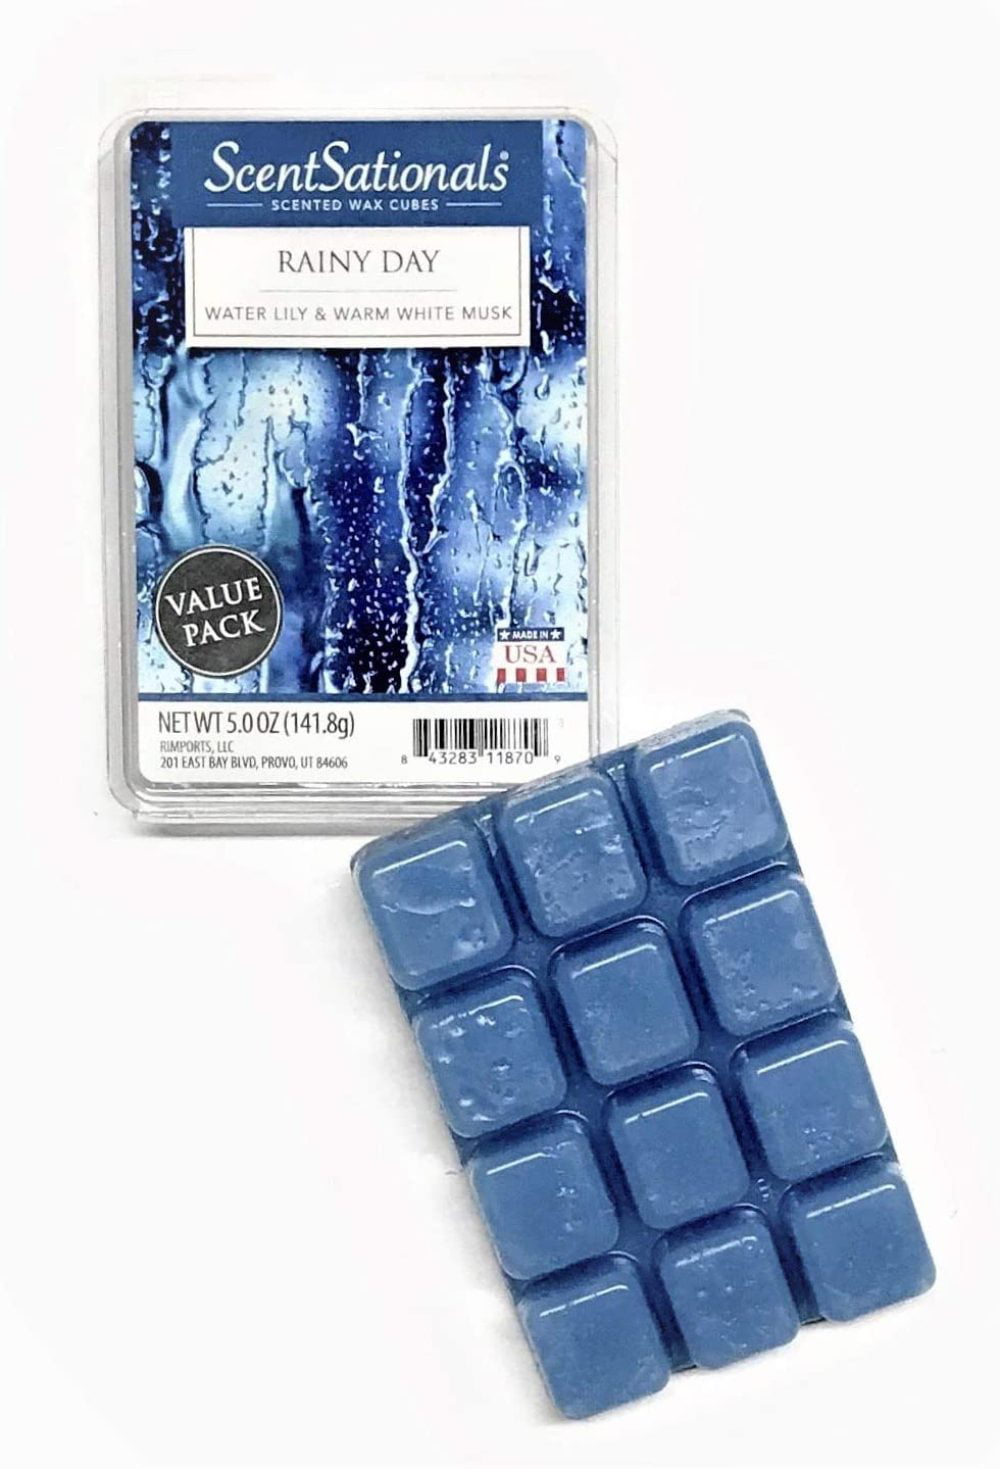 ScentSationals RAINY DAY Scented WAX CUBES 2 Packs 2.5 Oz Each